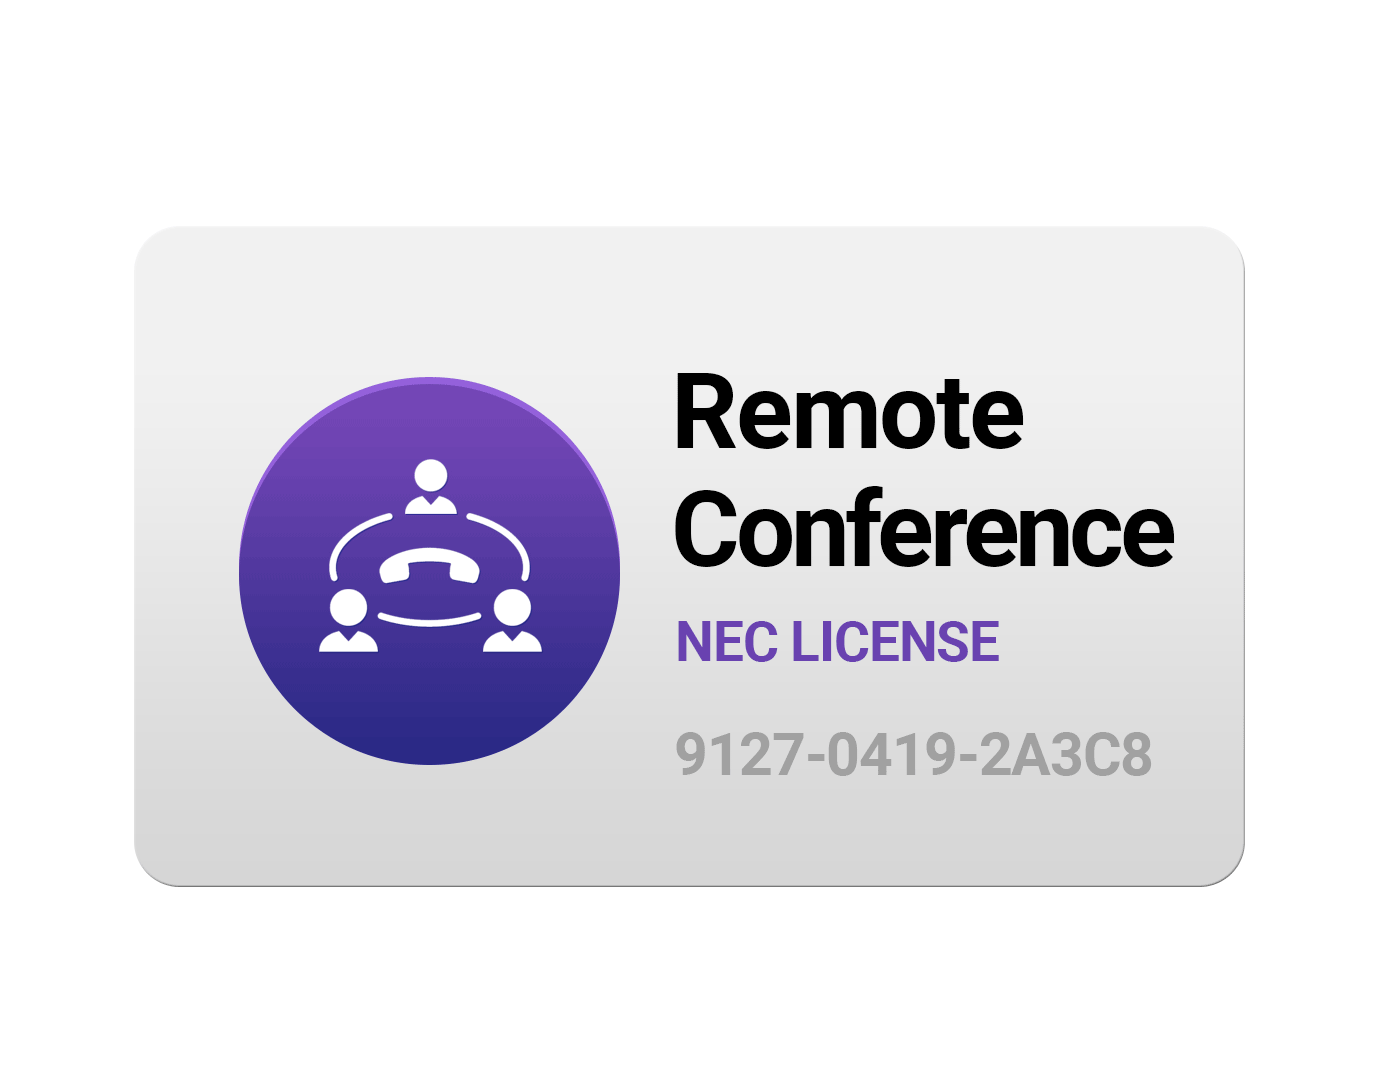 Remote Conference License BE116750